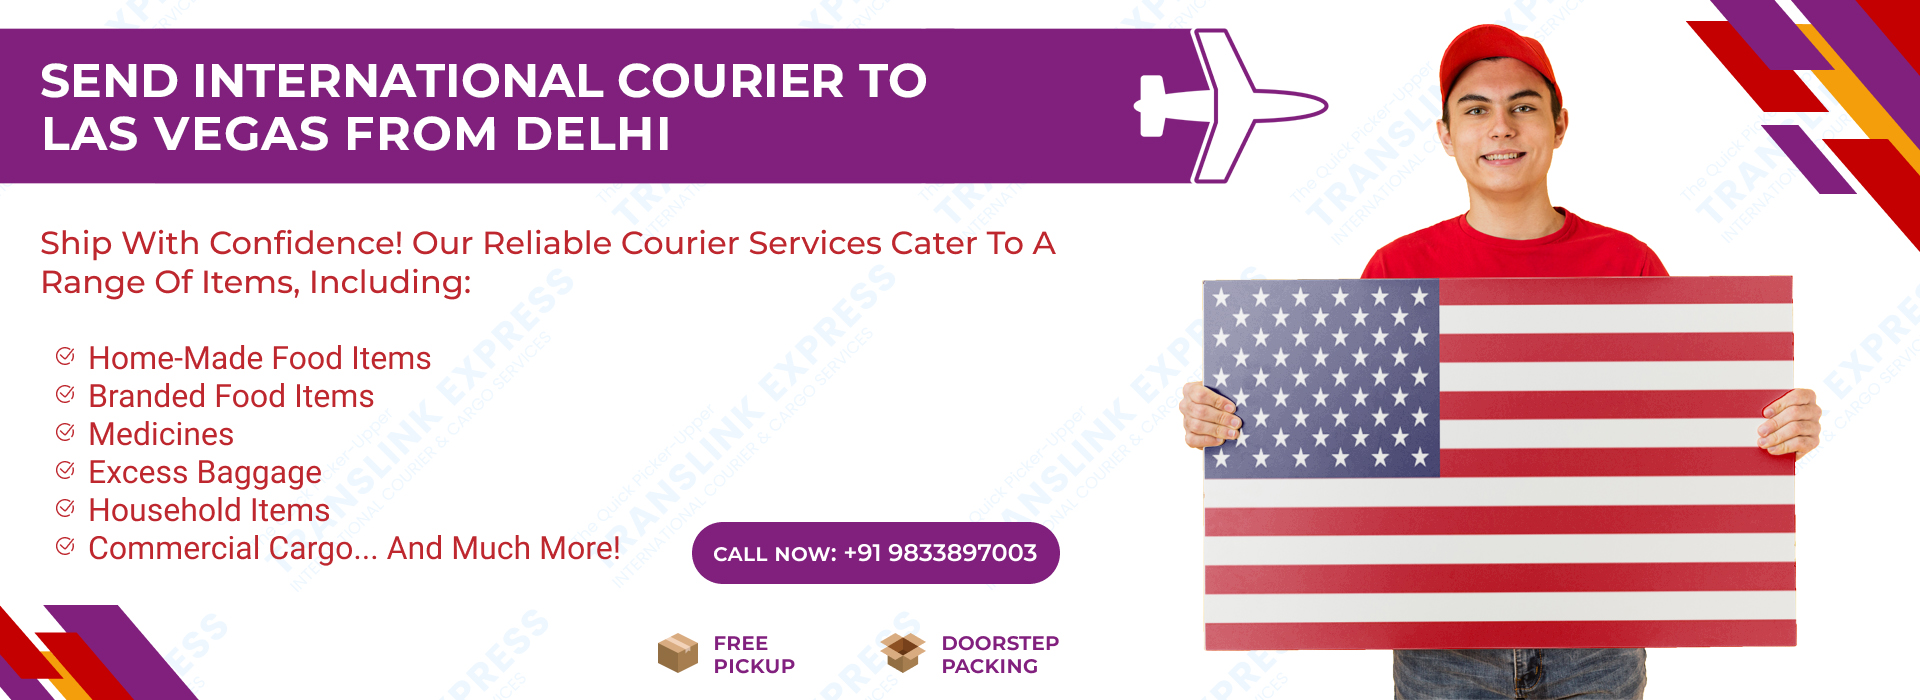 Courier to Las Vegas From Delhi